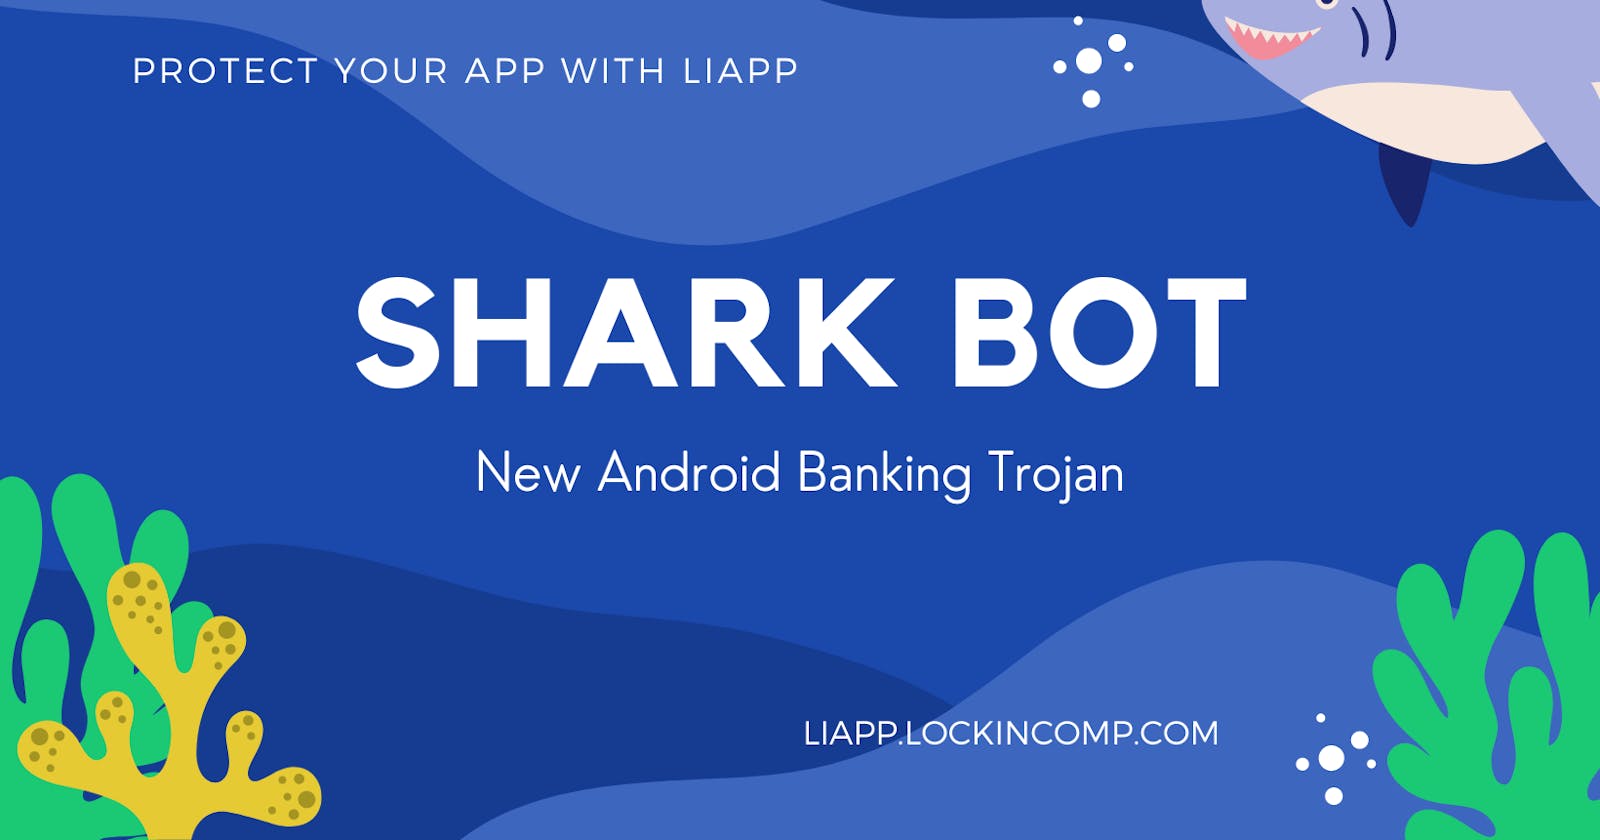 New Android banking trojan called "Sharkbot", its way of attack and how to defend